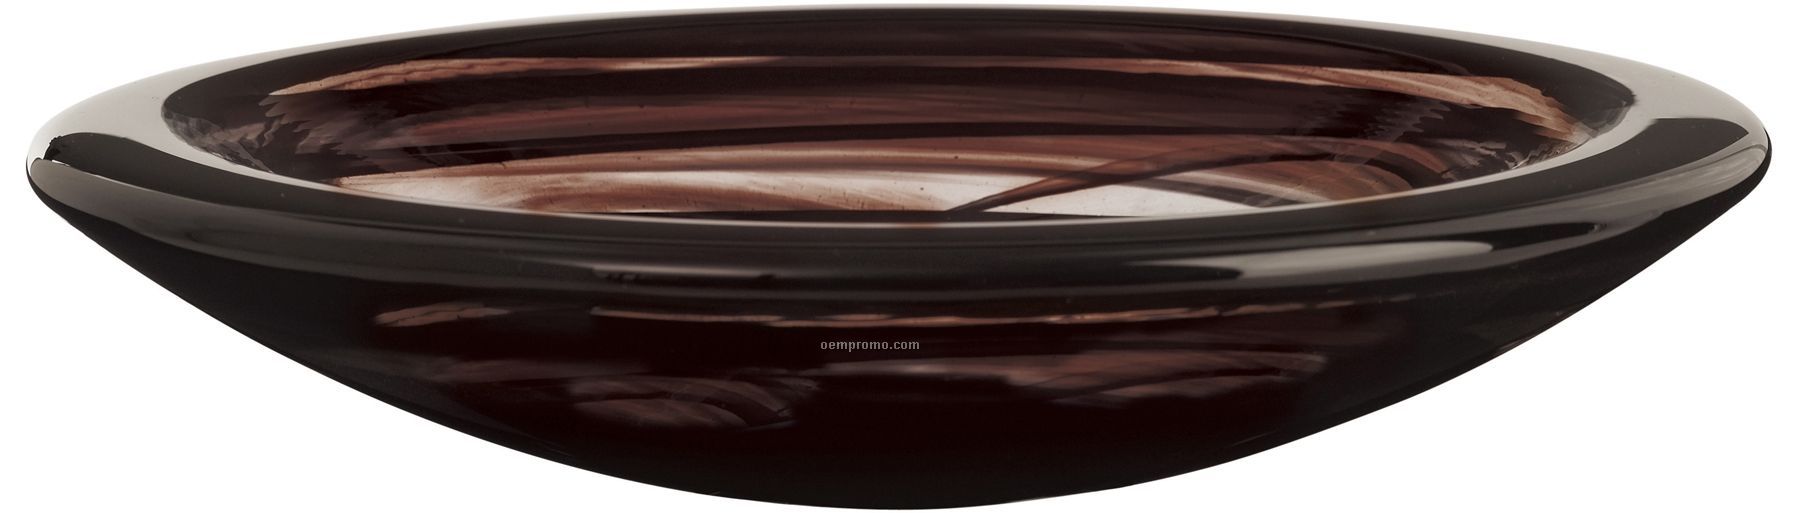 Atoll Marble Look Dish By Anna Ehrner (Brown)